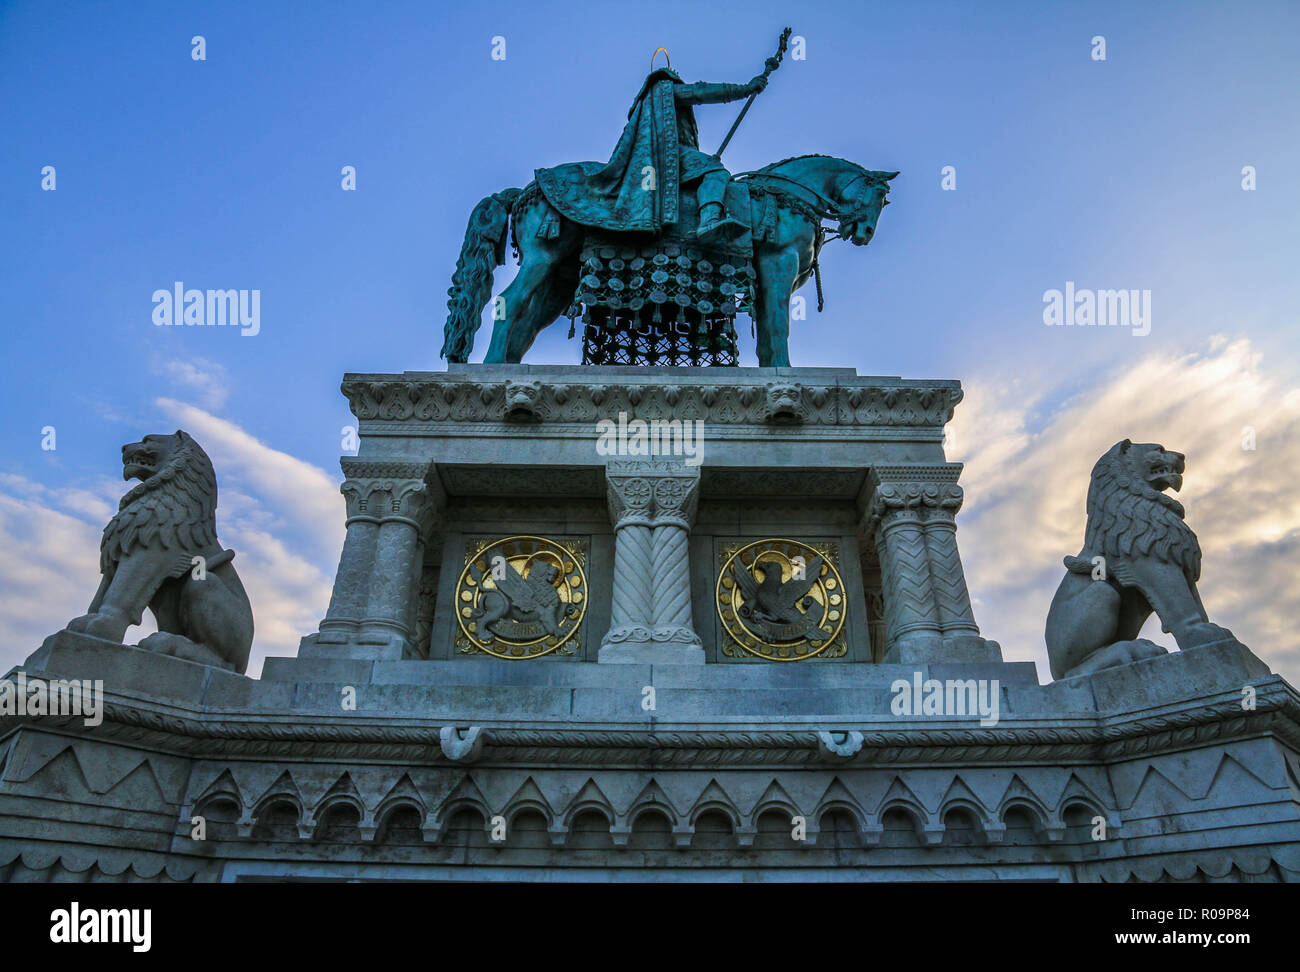 A bronze statue of Stephen I of Hungary mounted on a horse, erected in 1906, can be seen between the Bastion and the Matthias Church. Stock Photo